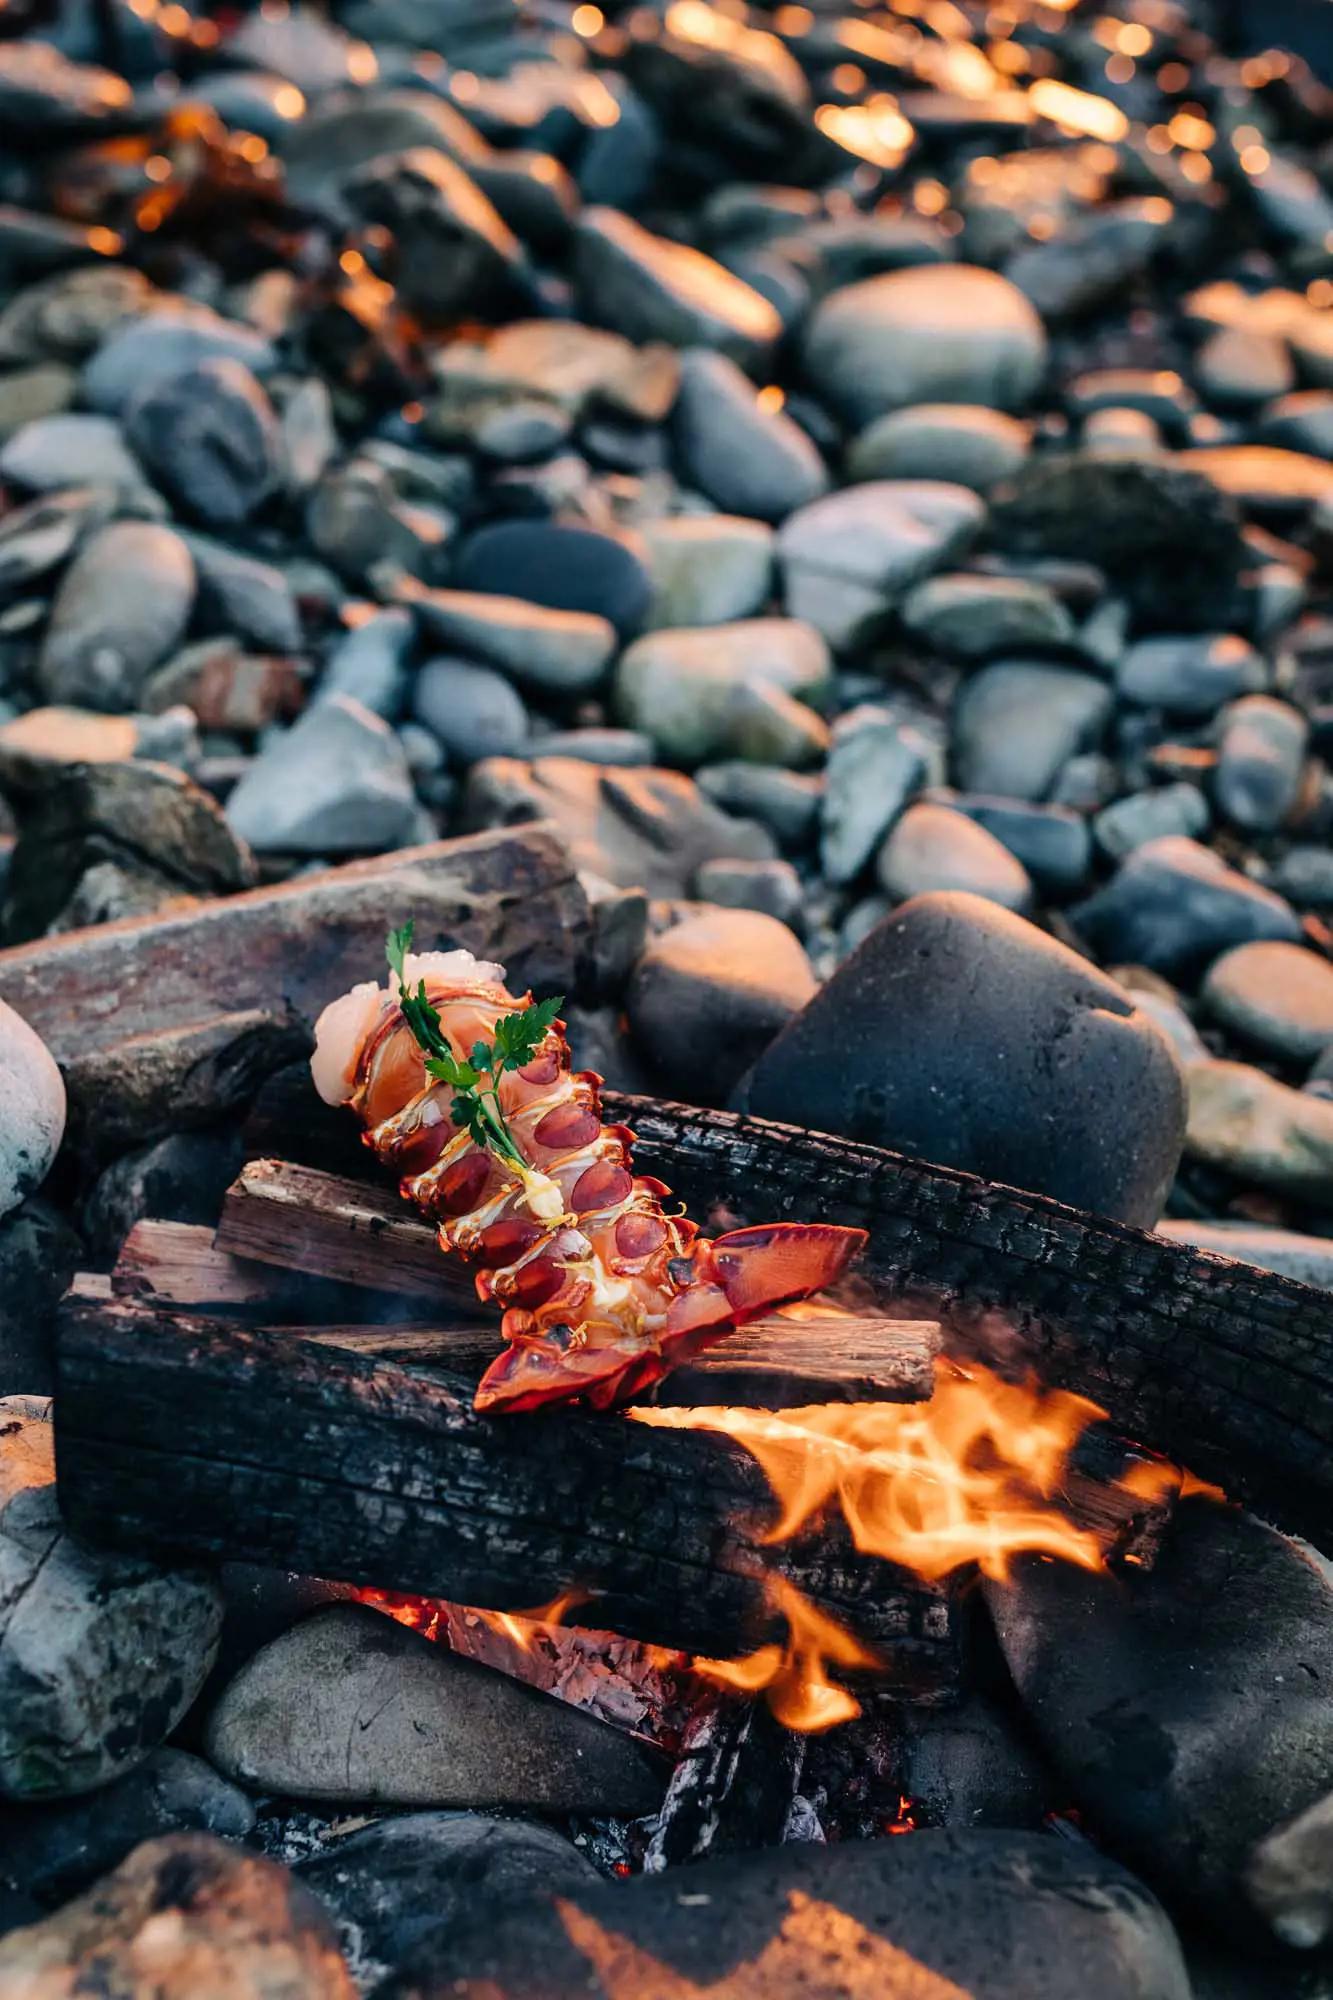 A crayfish, cooking on the coals of a fire on a pebble beach.